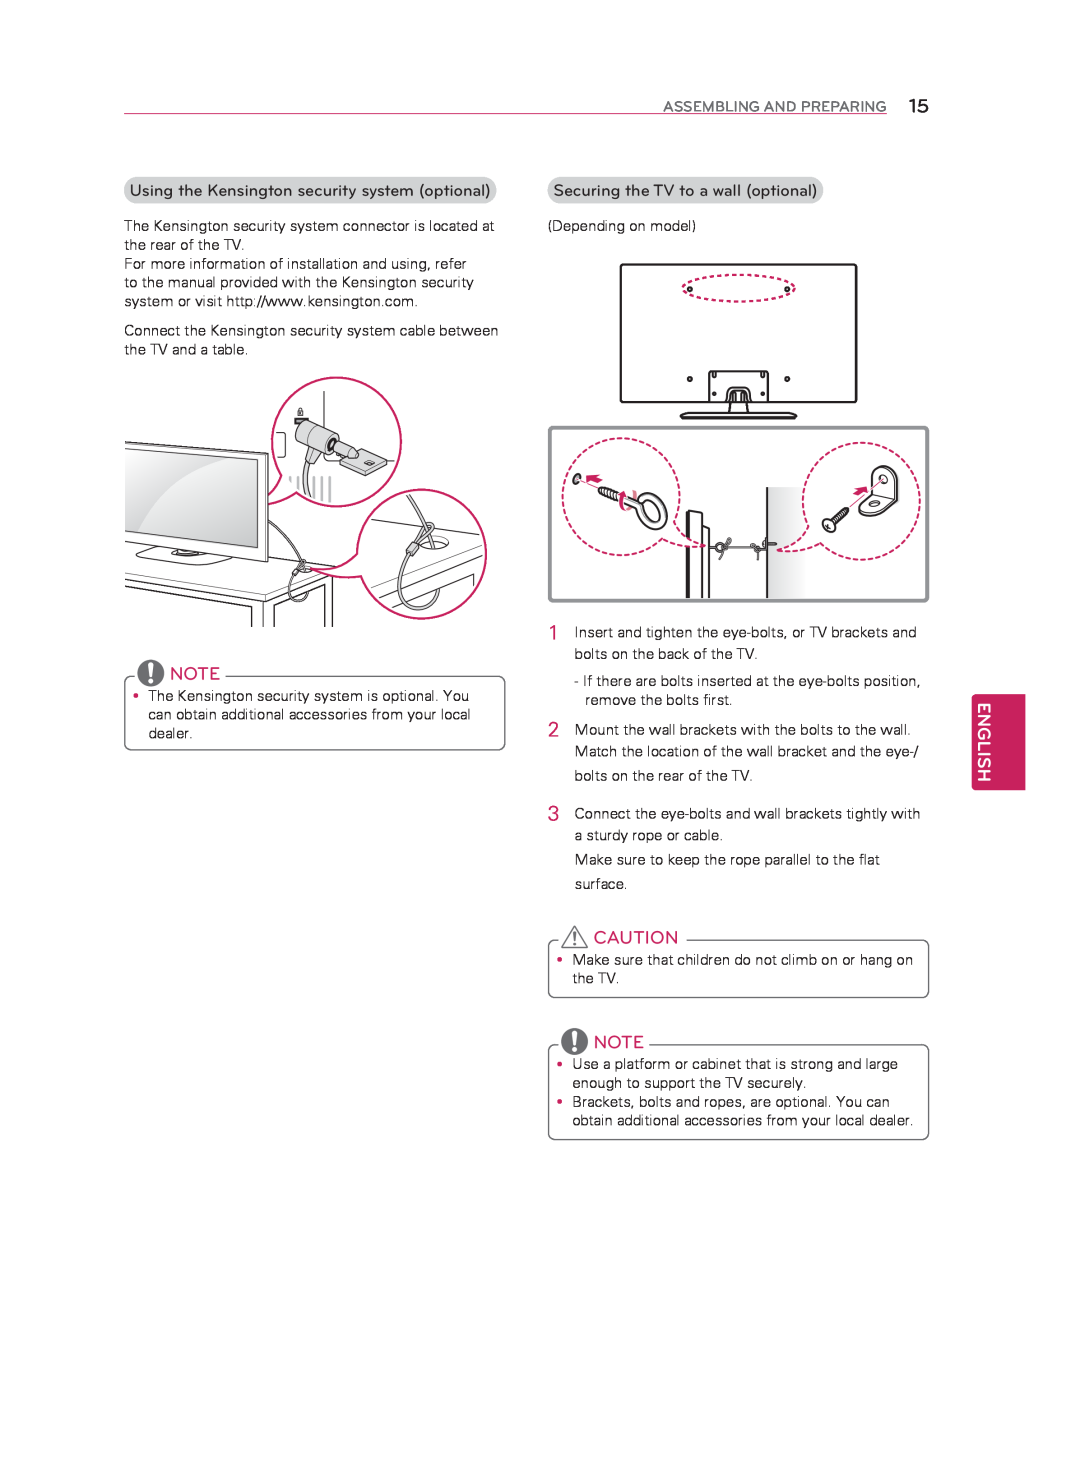 LG Electronics 60LN5400 owner manual English, Assembling And Preparing, Using the Kensington security system optional 